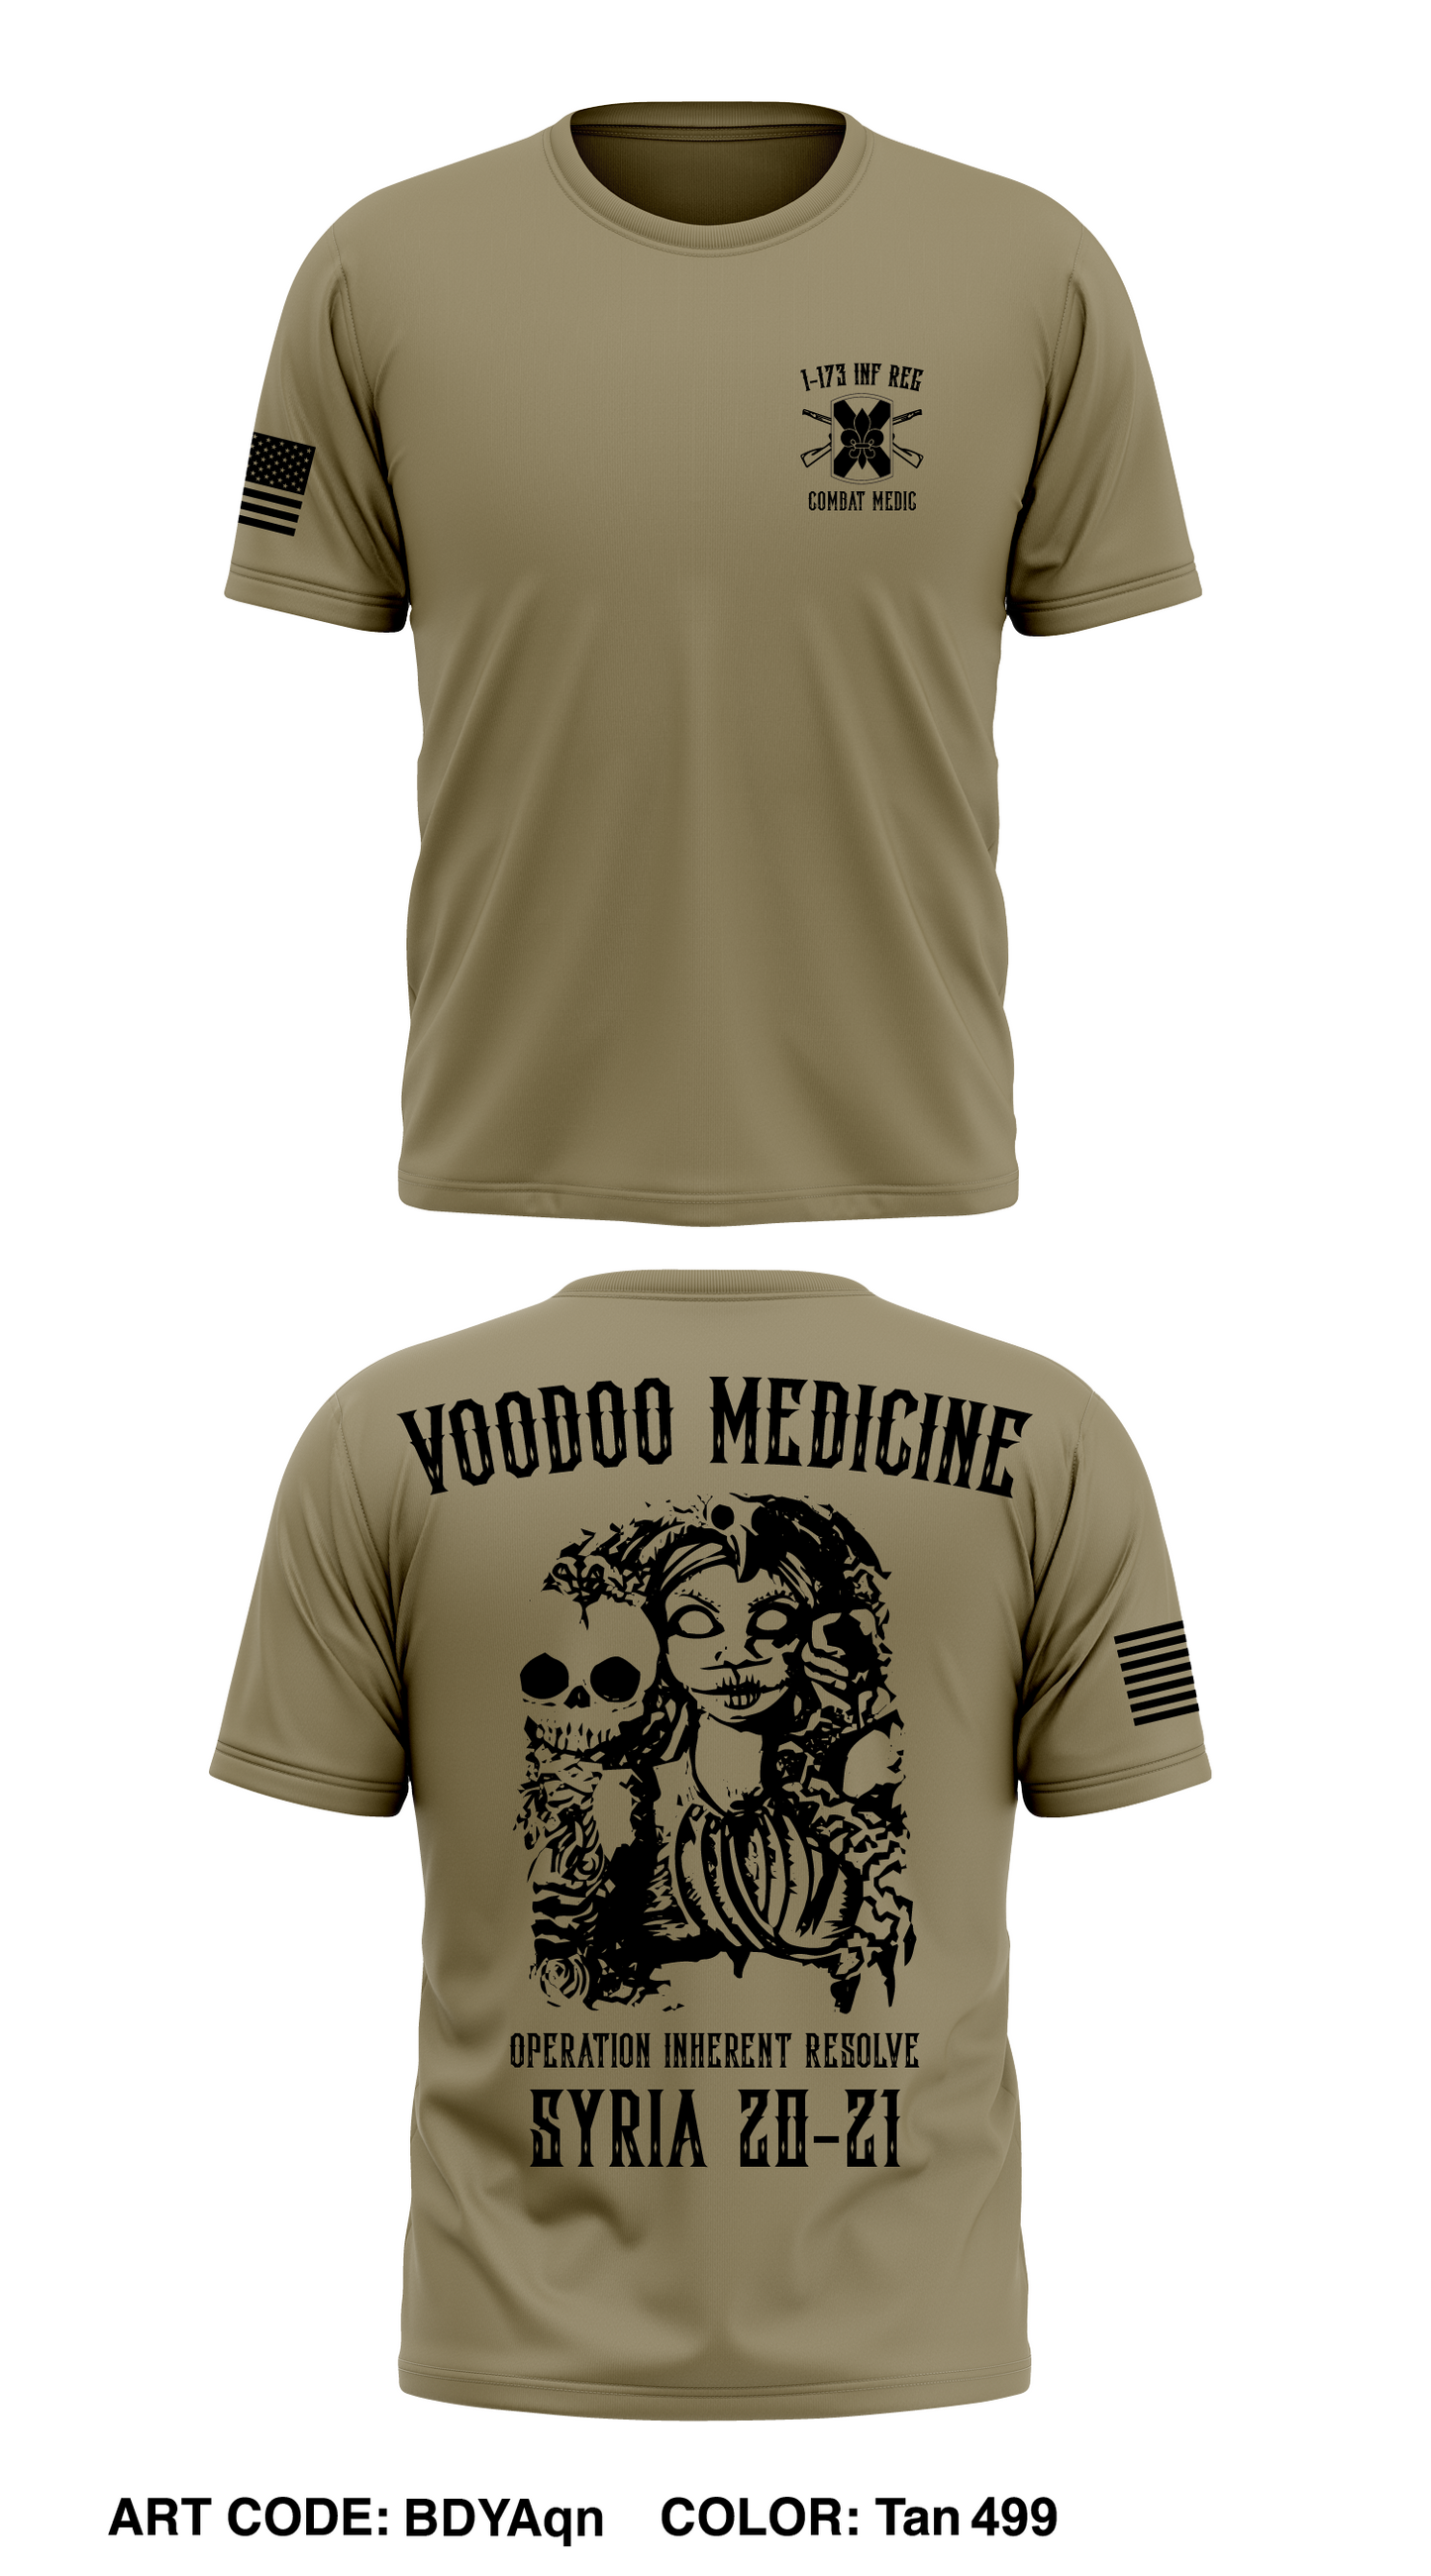 1-173 Inf. Reg. Medic Section Store 1 Core Men's SS Performance Tee - BDYAqn